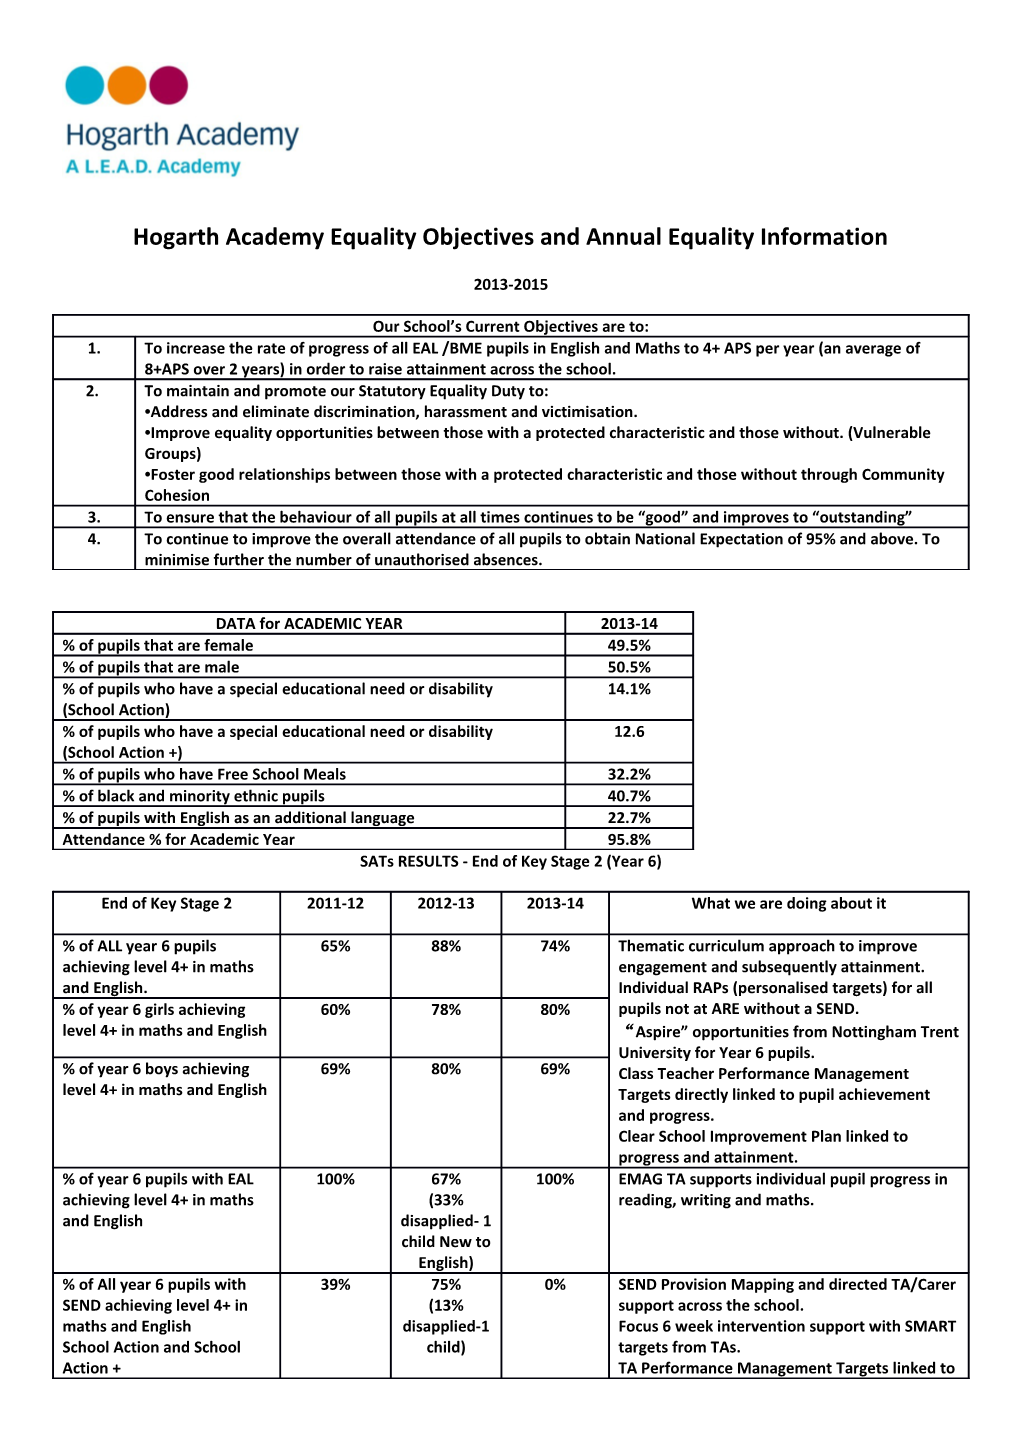 Hogarth Academy Equality Objectives and Annual Equality Information